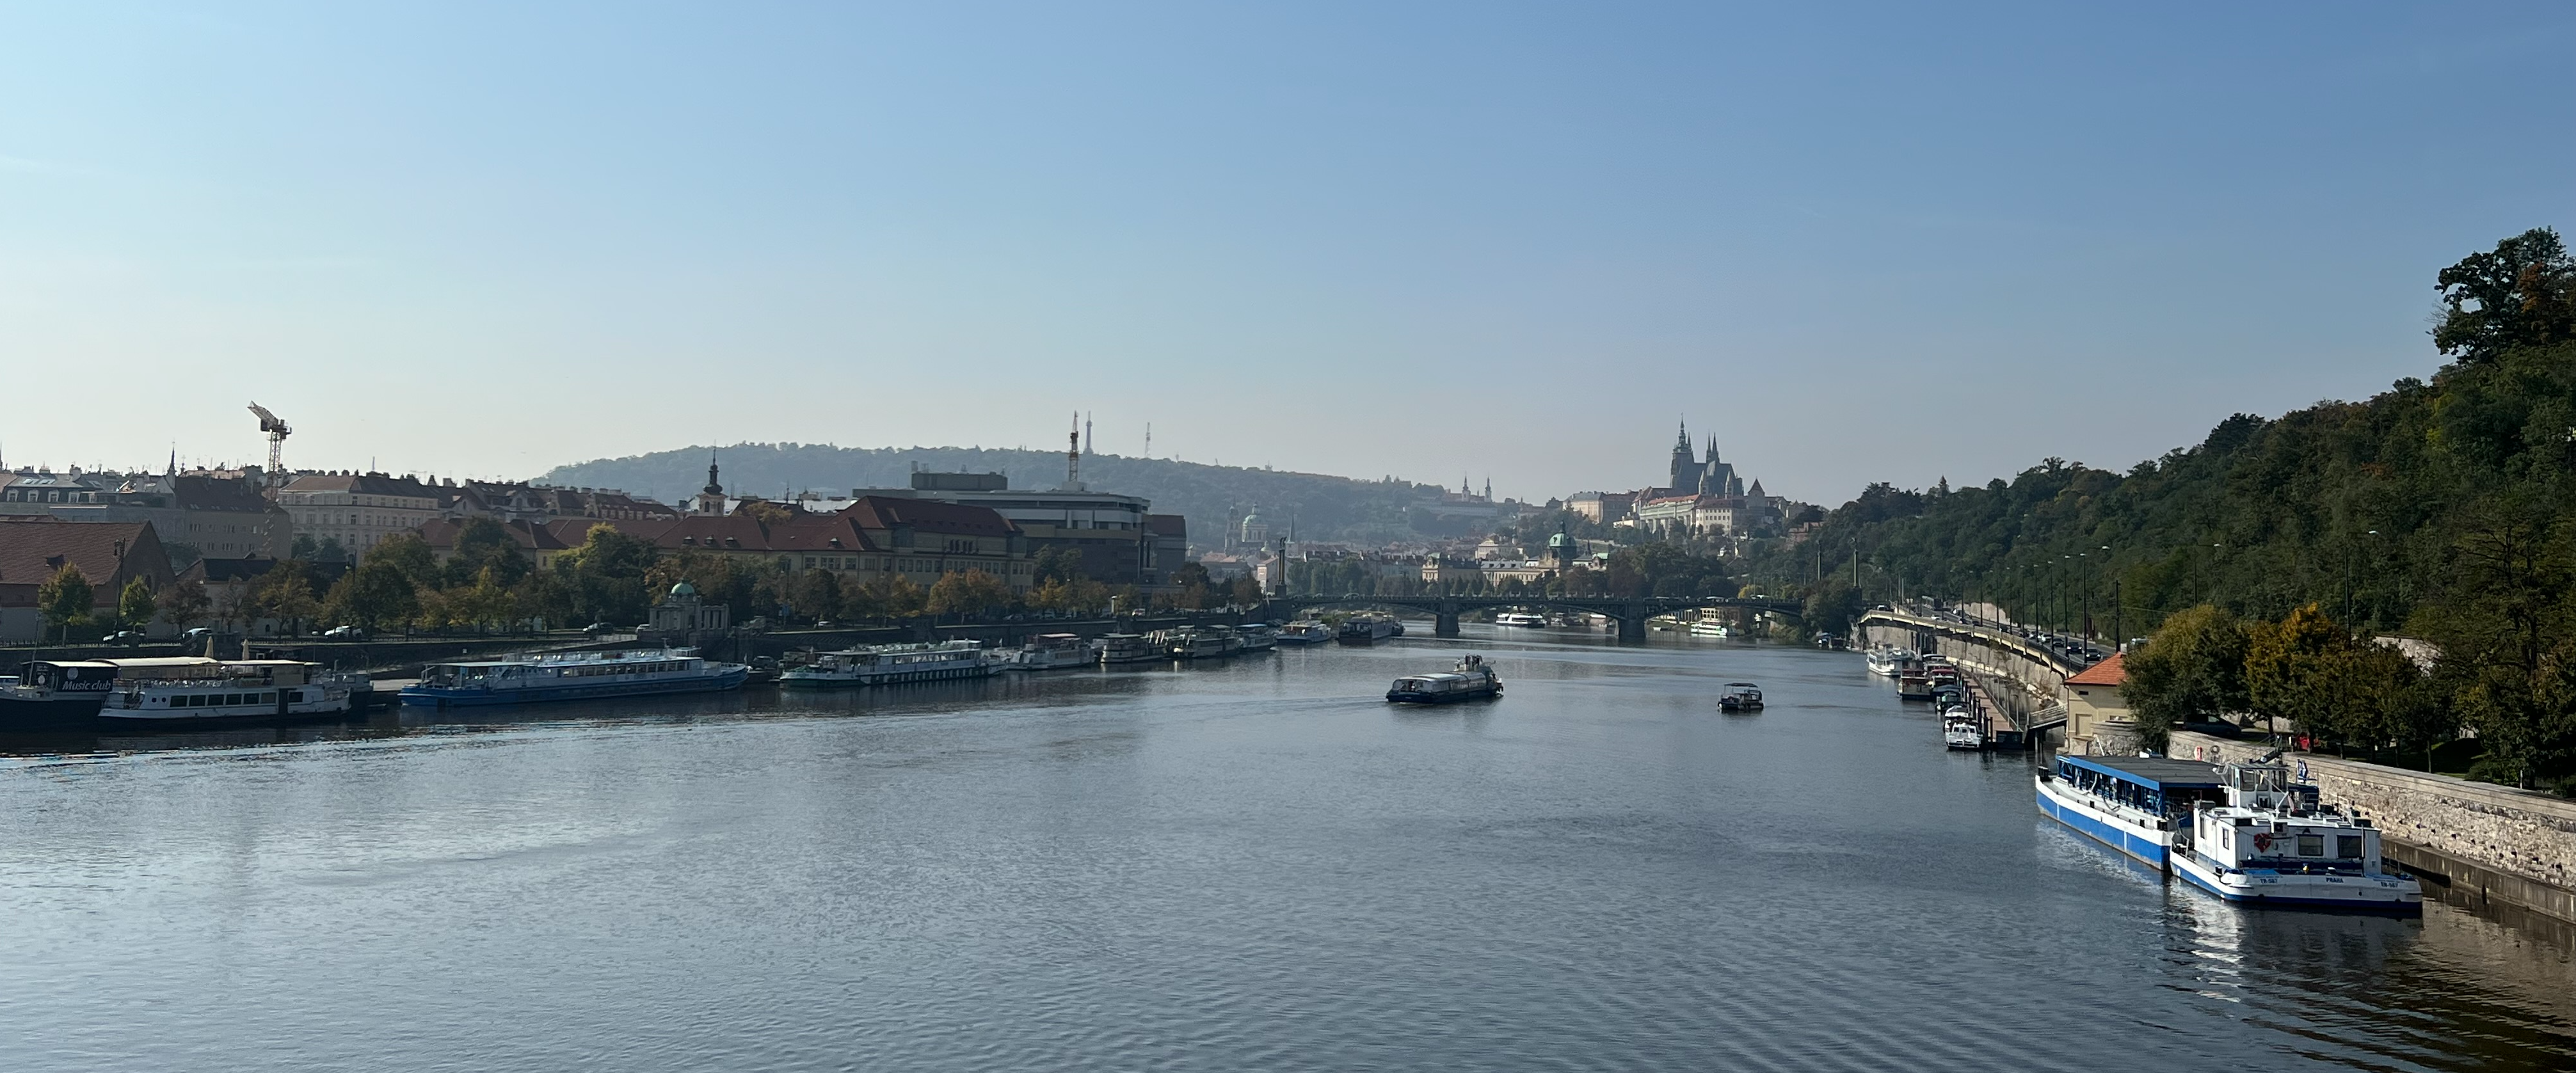 It doesn't feel like the NHL Global Series is taking place in Prague